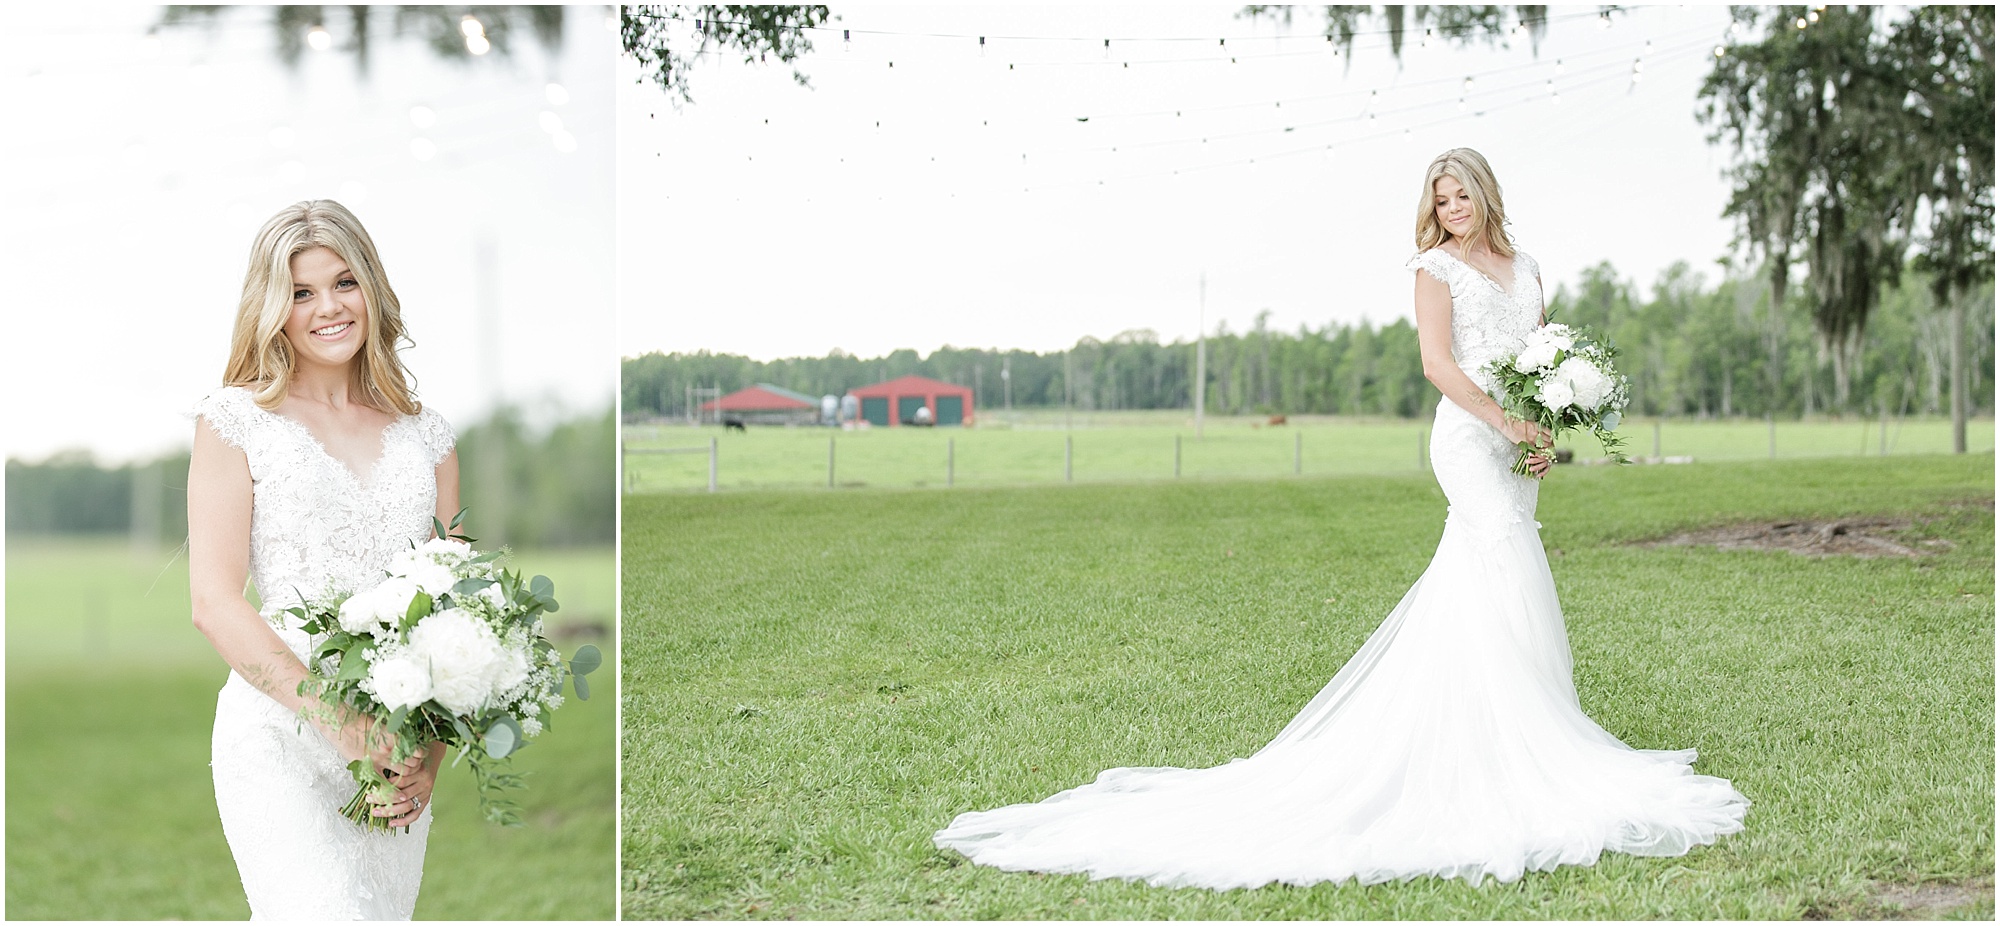 Bride taking her portraits in the grass field. 